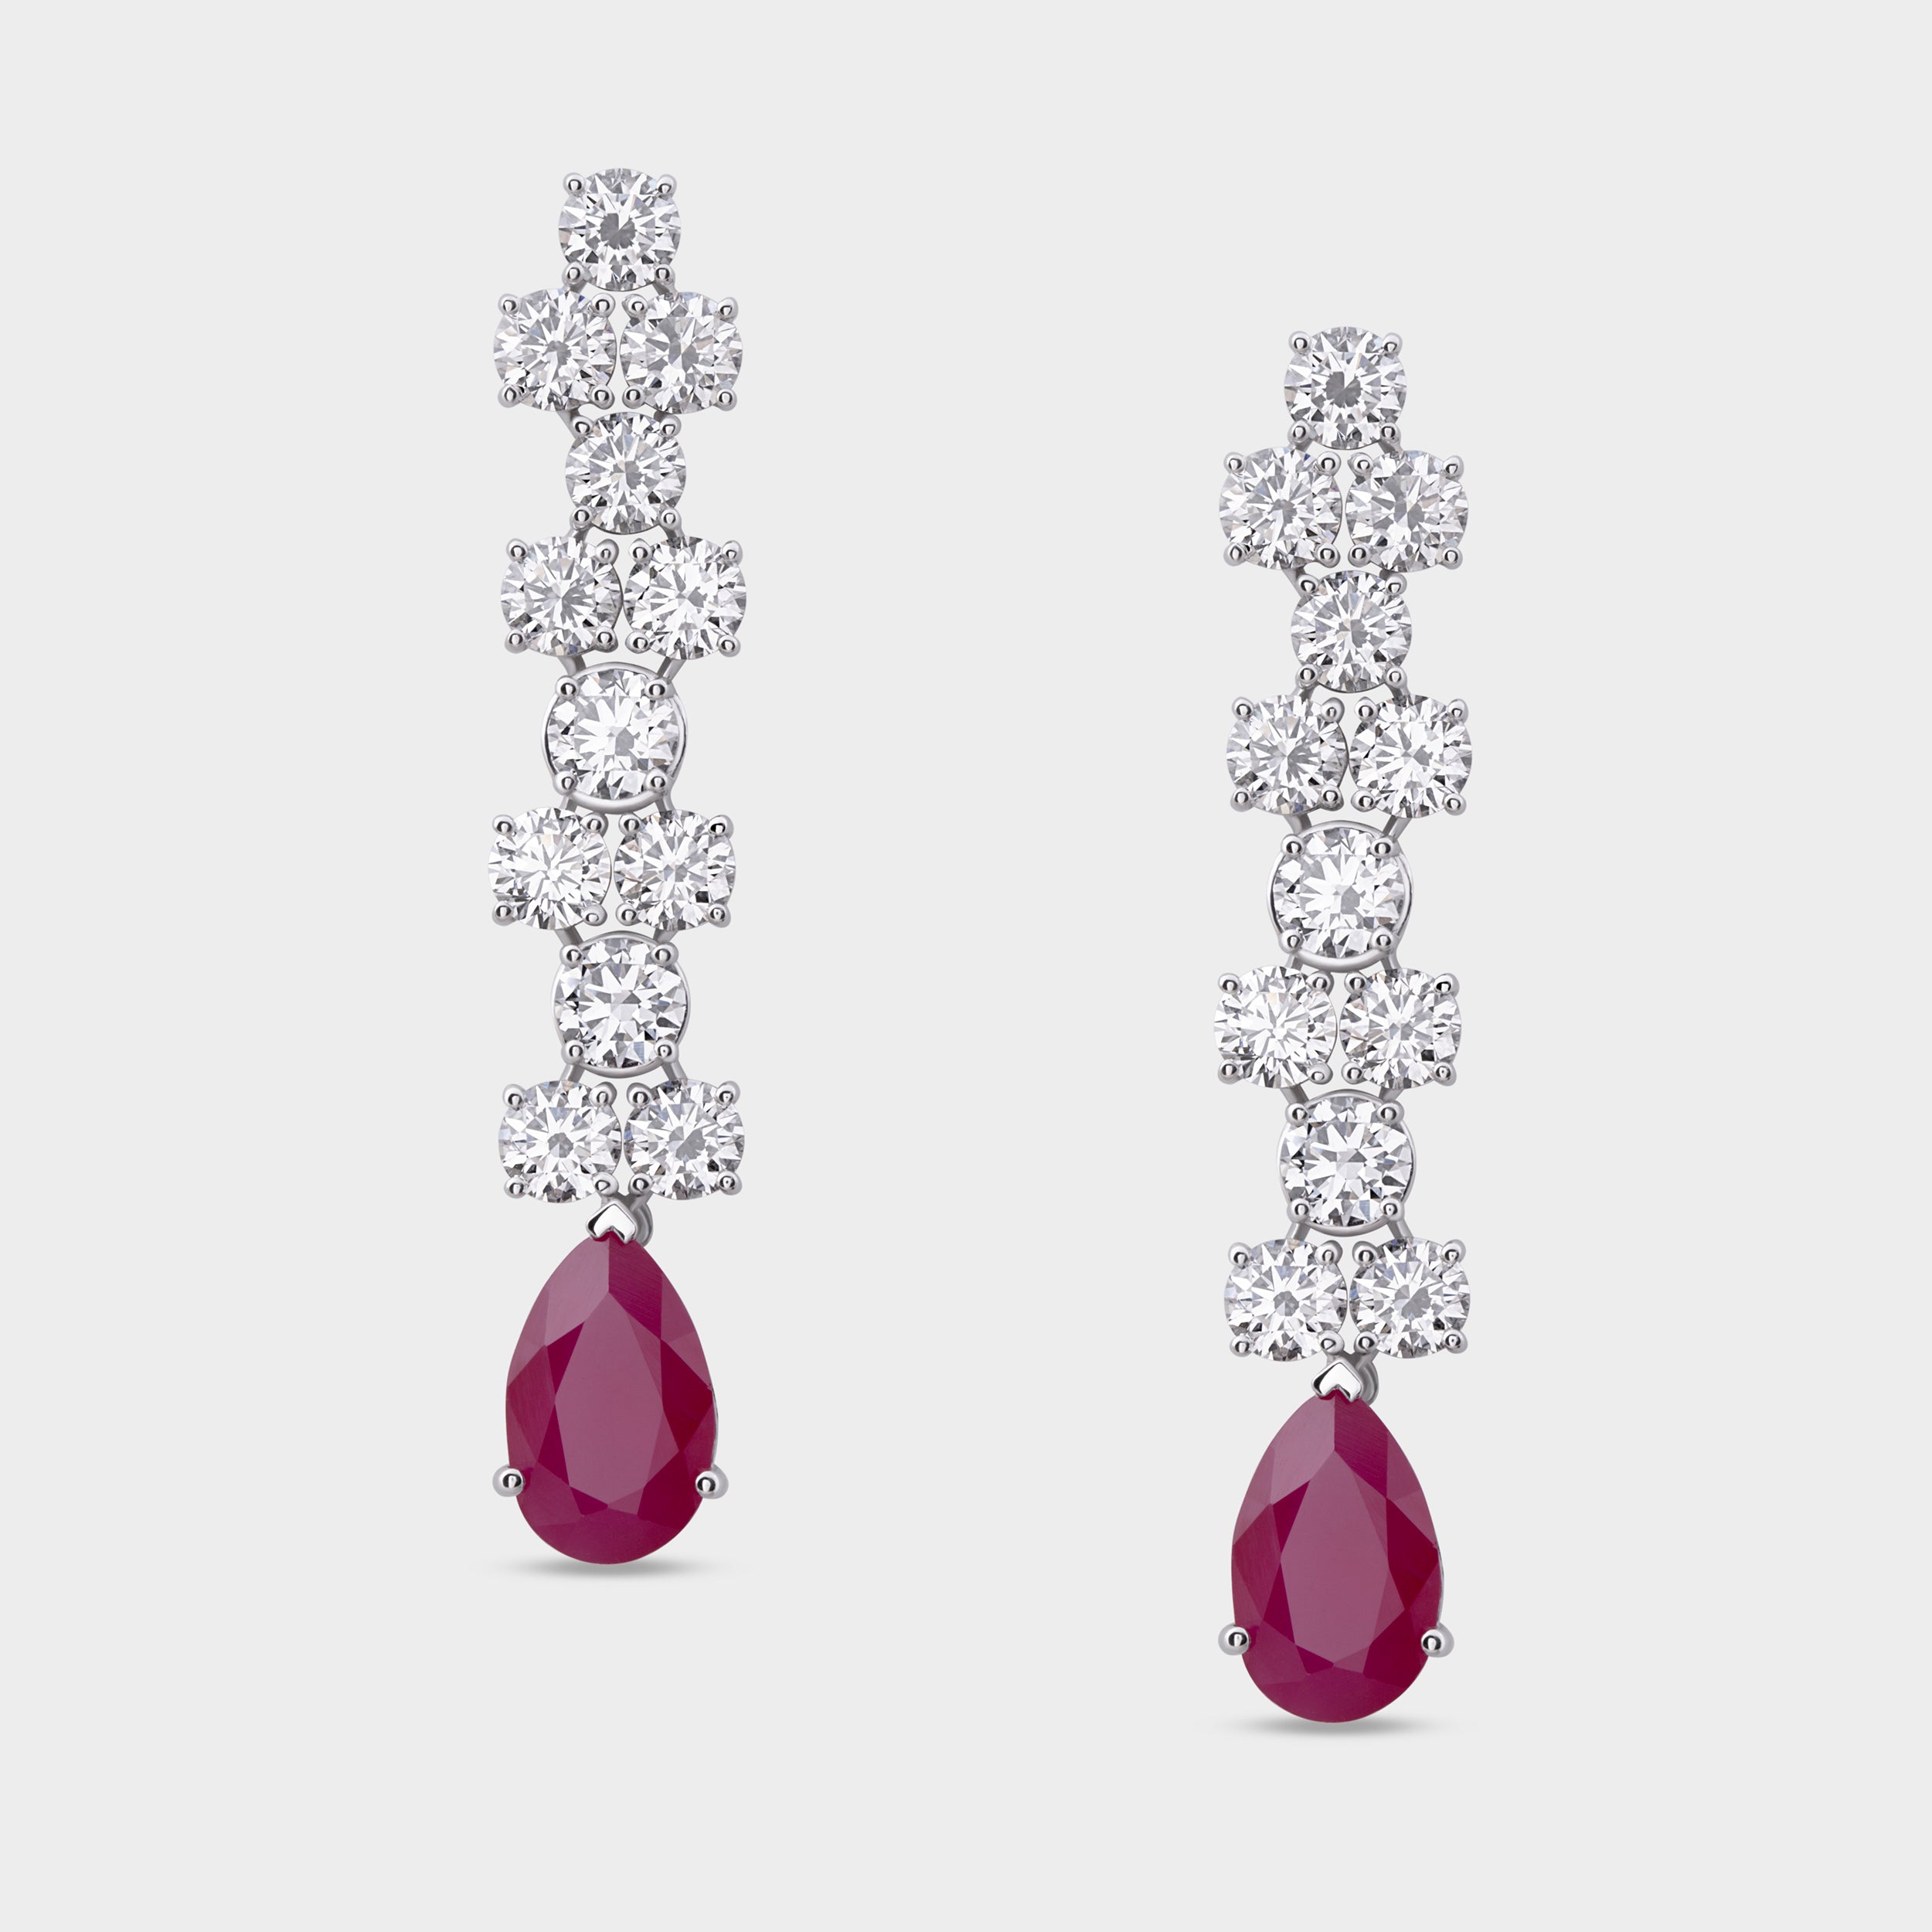 Ethereal Fusion: Fancy White Gold Lab Grown Solitaire Diamond Eardrops with Red Gem | SKU : 0019801568